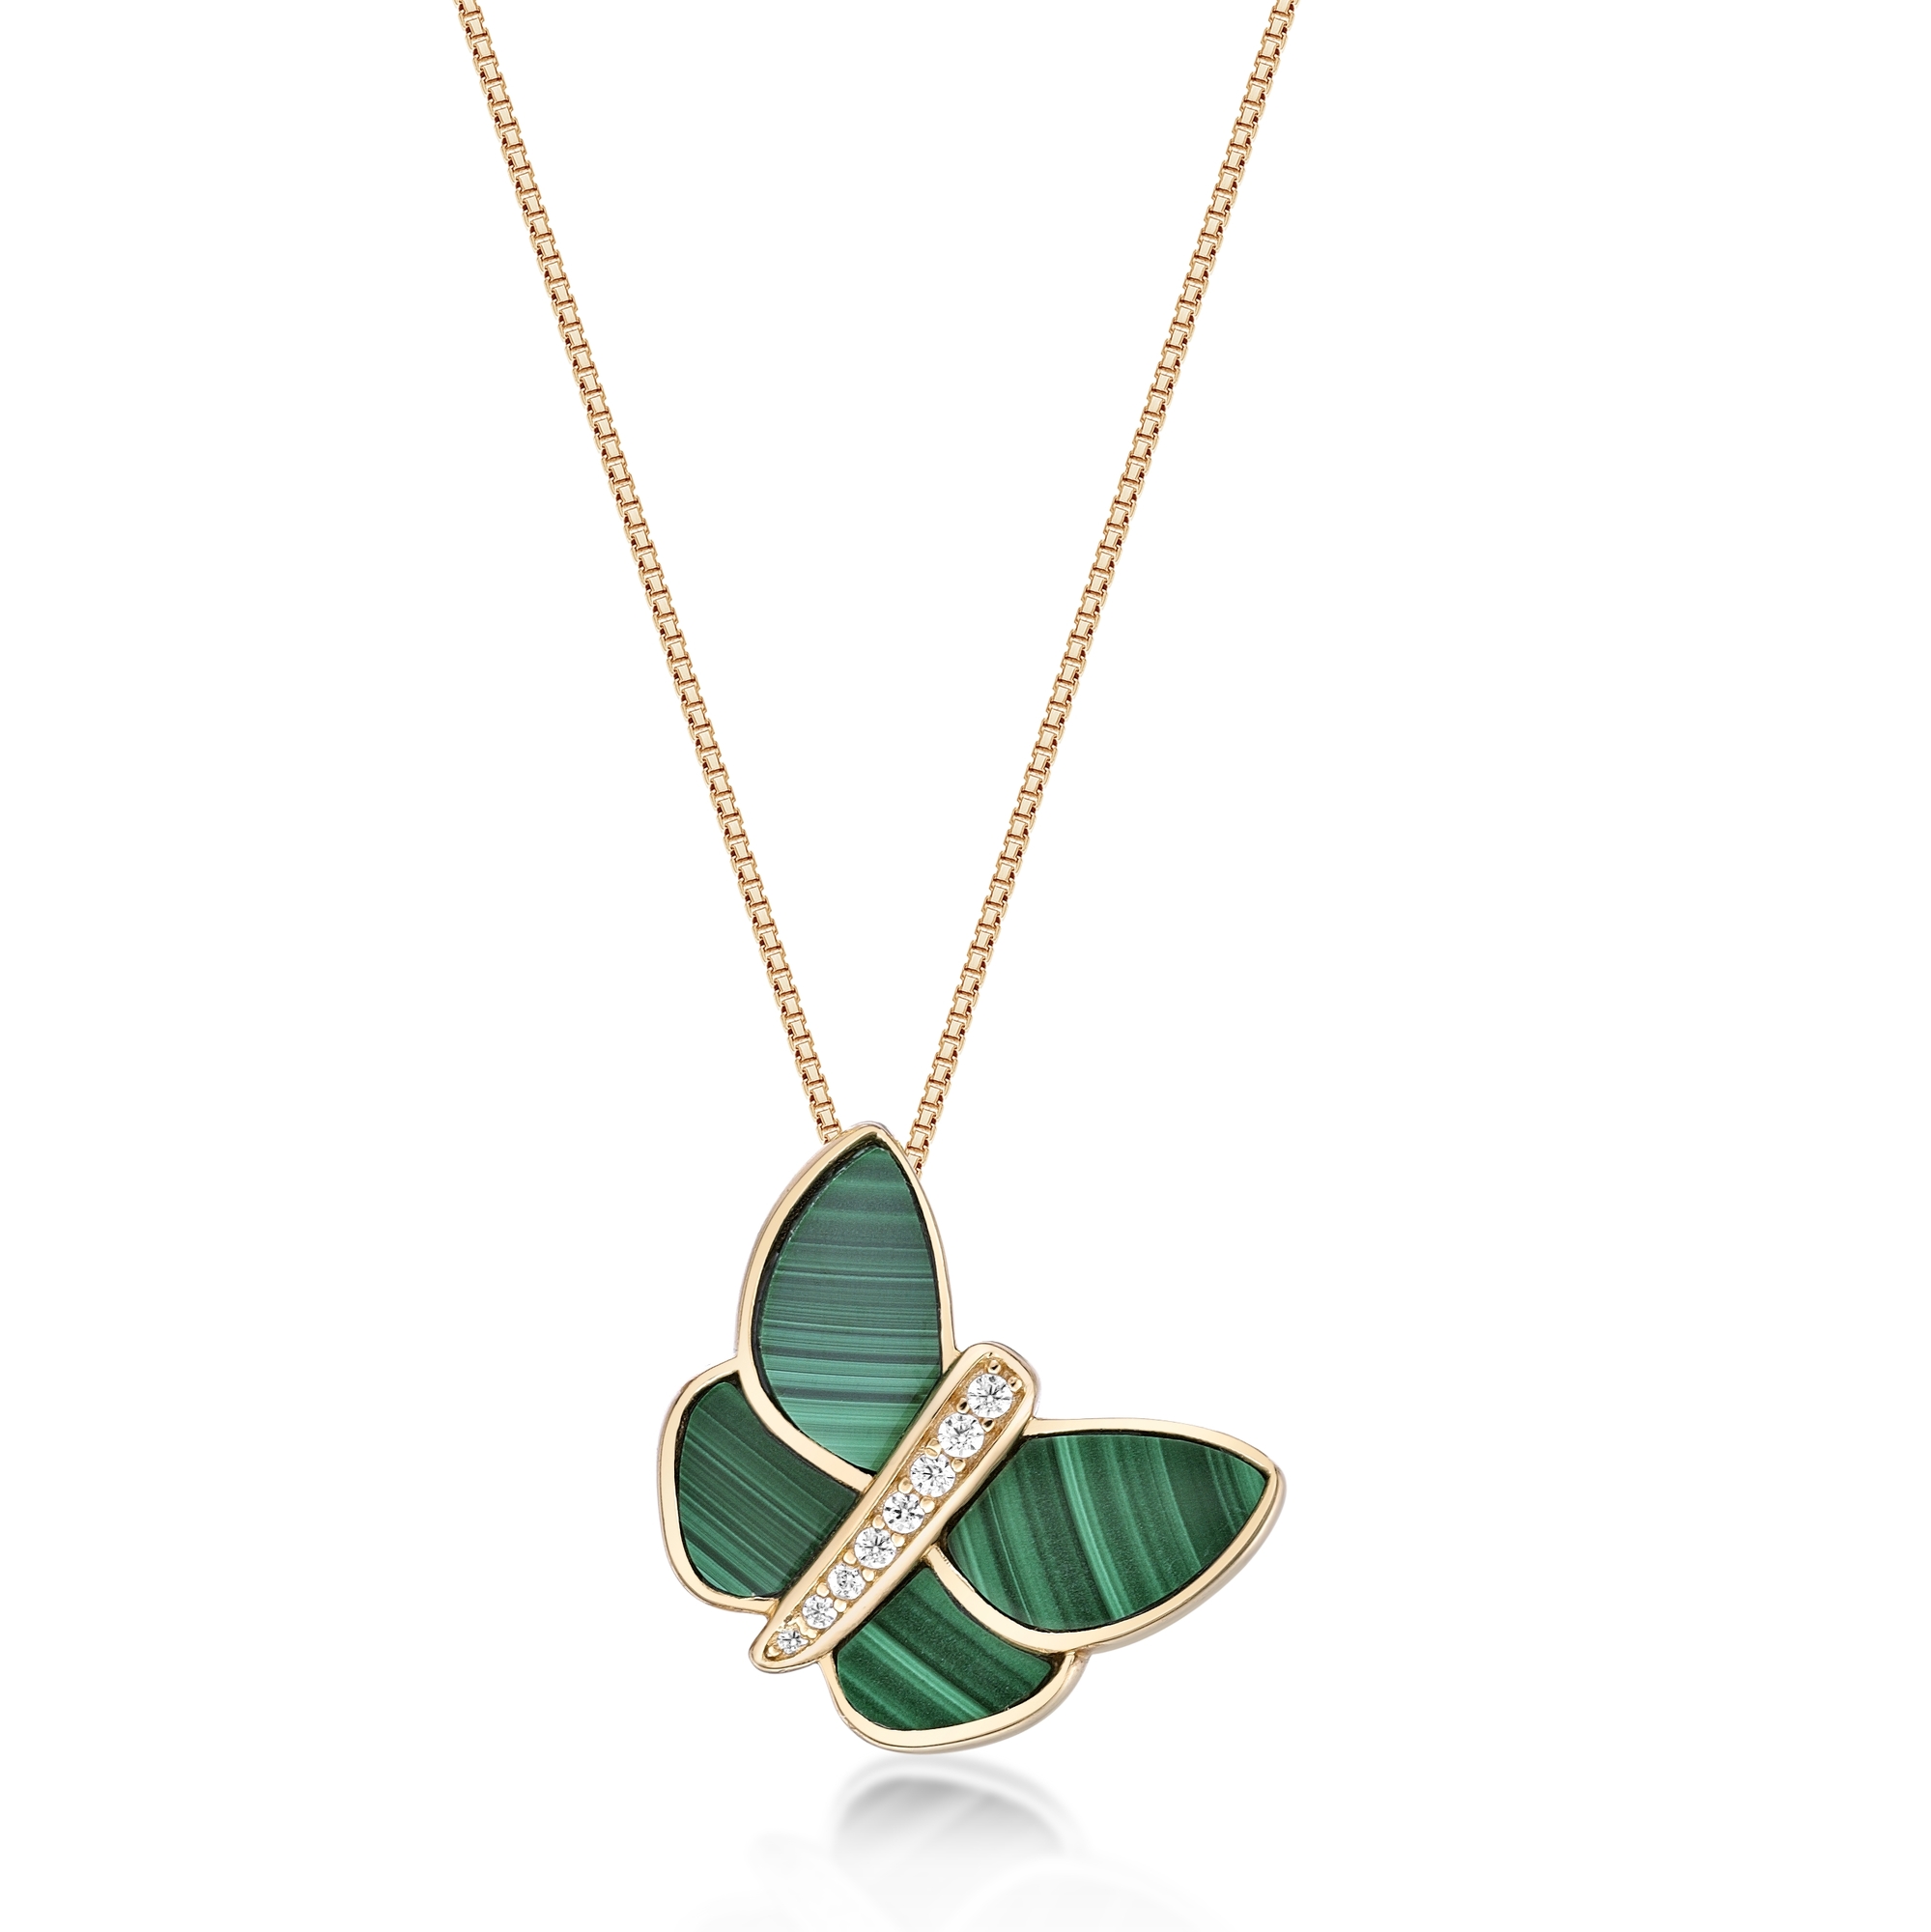 Women’s Malachite Butterfly Pendant Necklace with Spring Ring Clasp, 925 Sterling Silver, Cubic Zirconia, 18 Inch Chain - Fauna | Lavari Jewelers